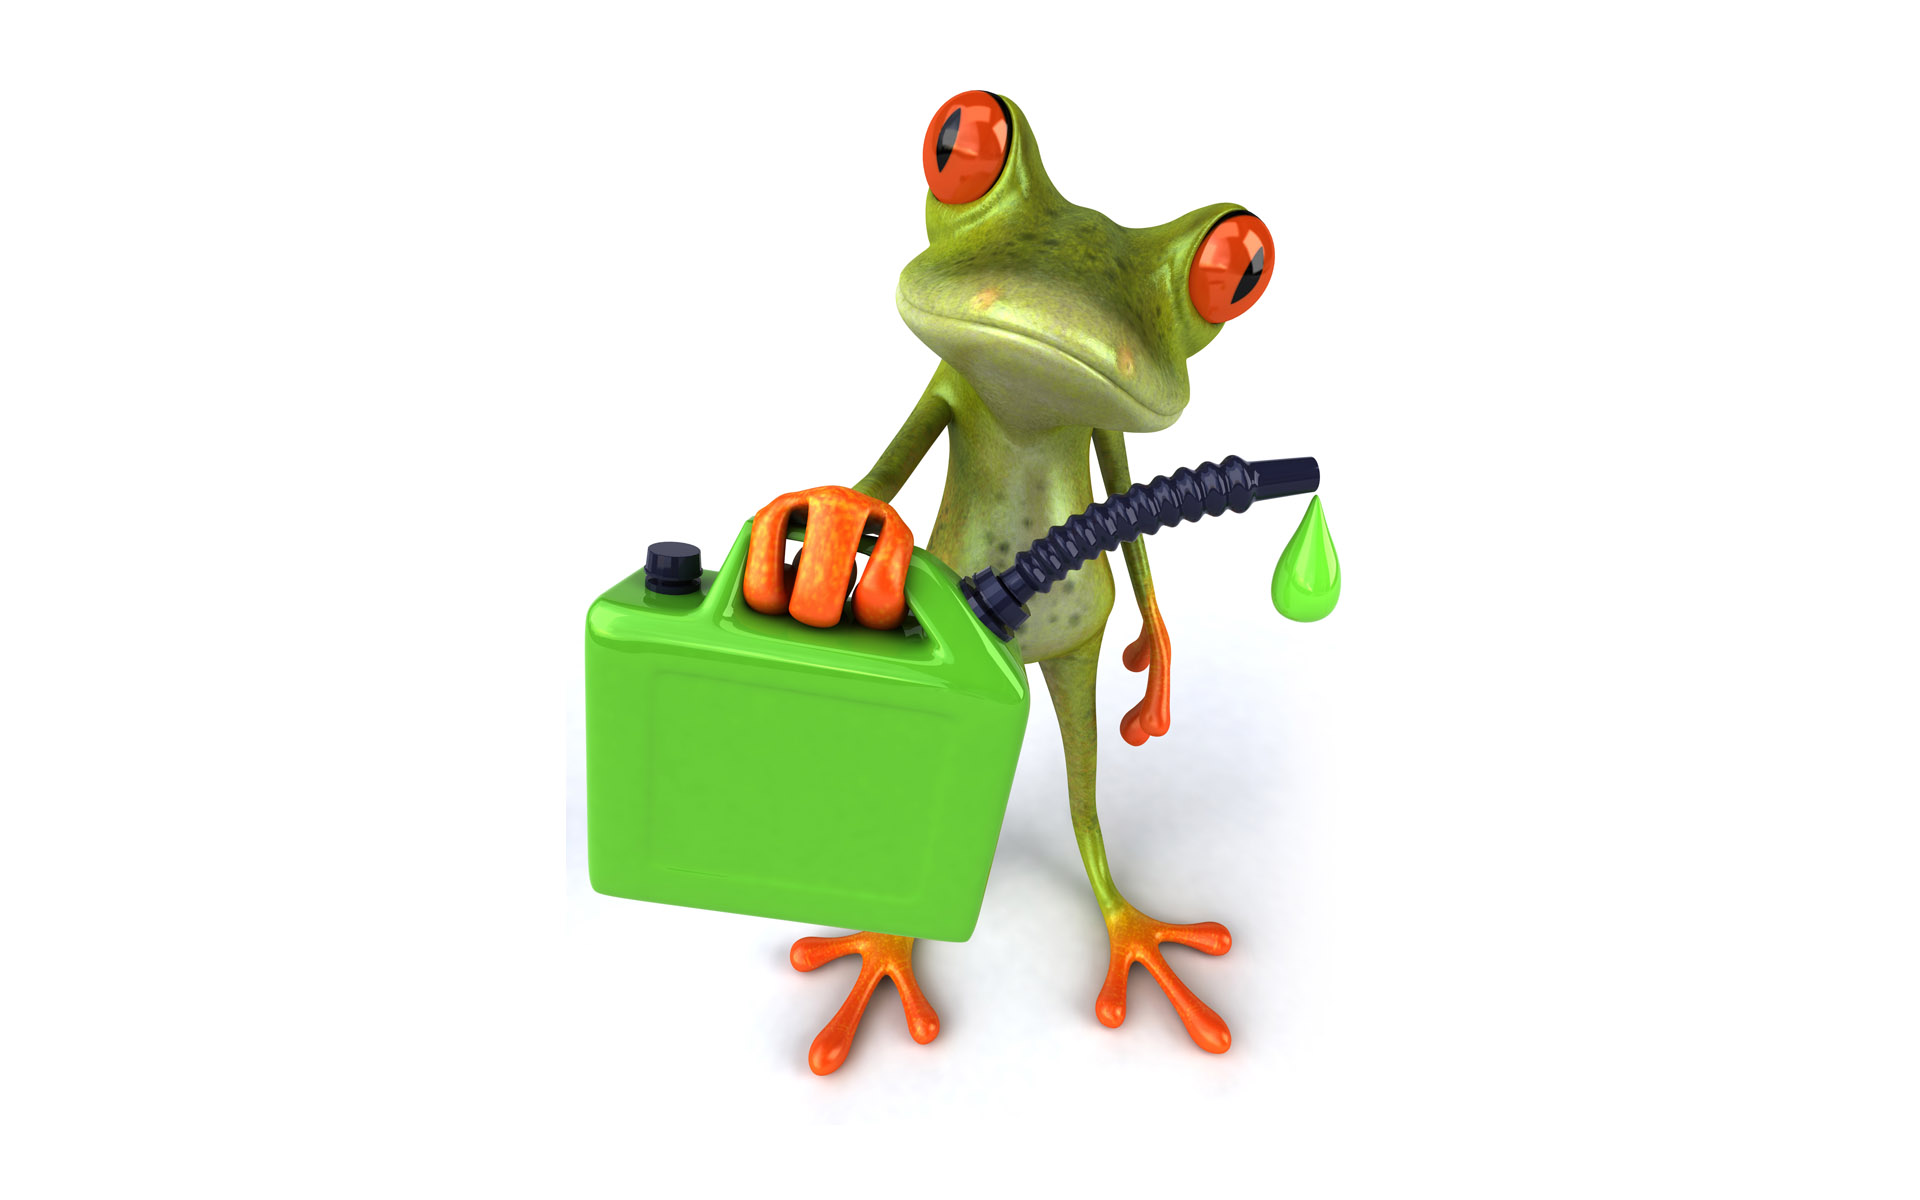 frog 3d wallpaper for desktop is a great wallpaper for your computer